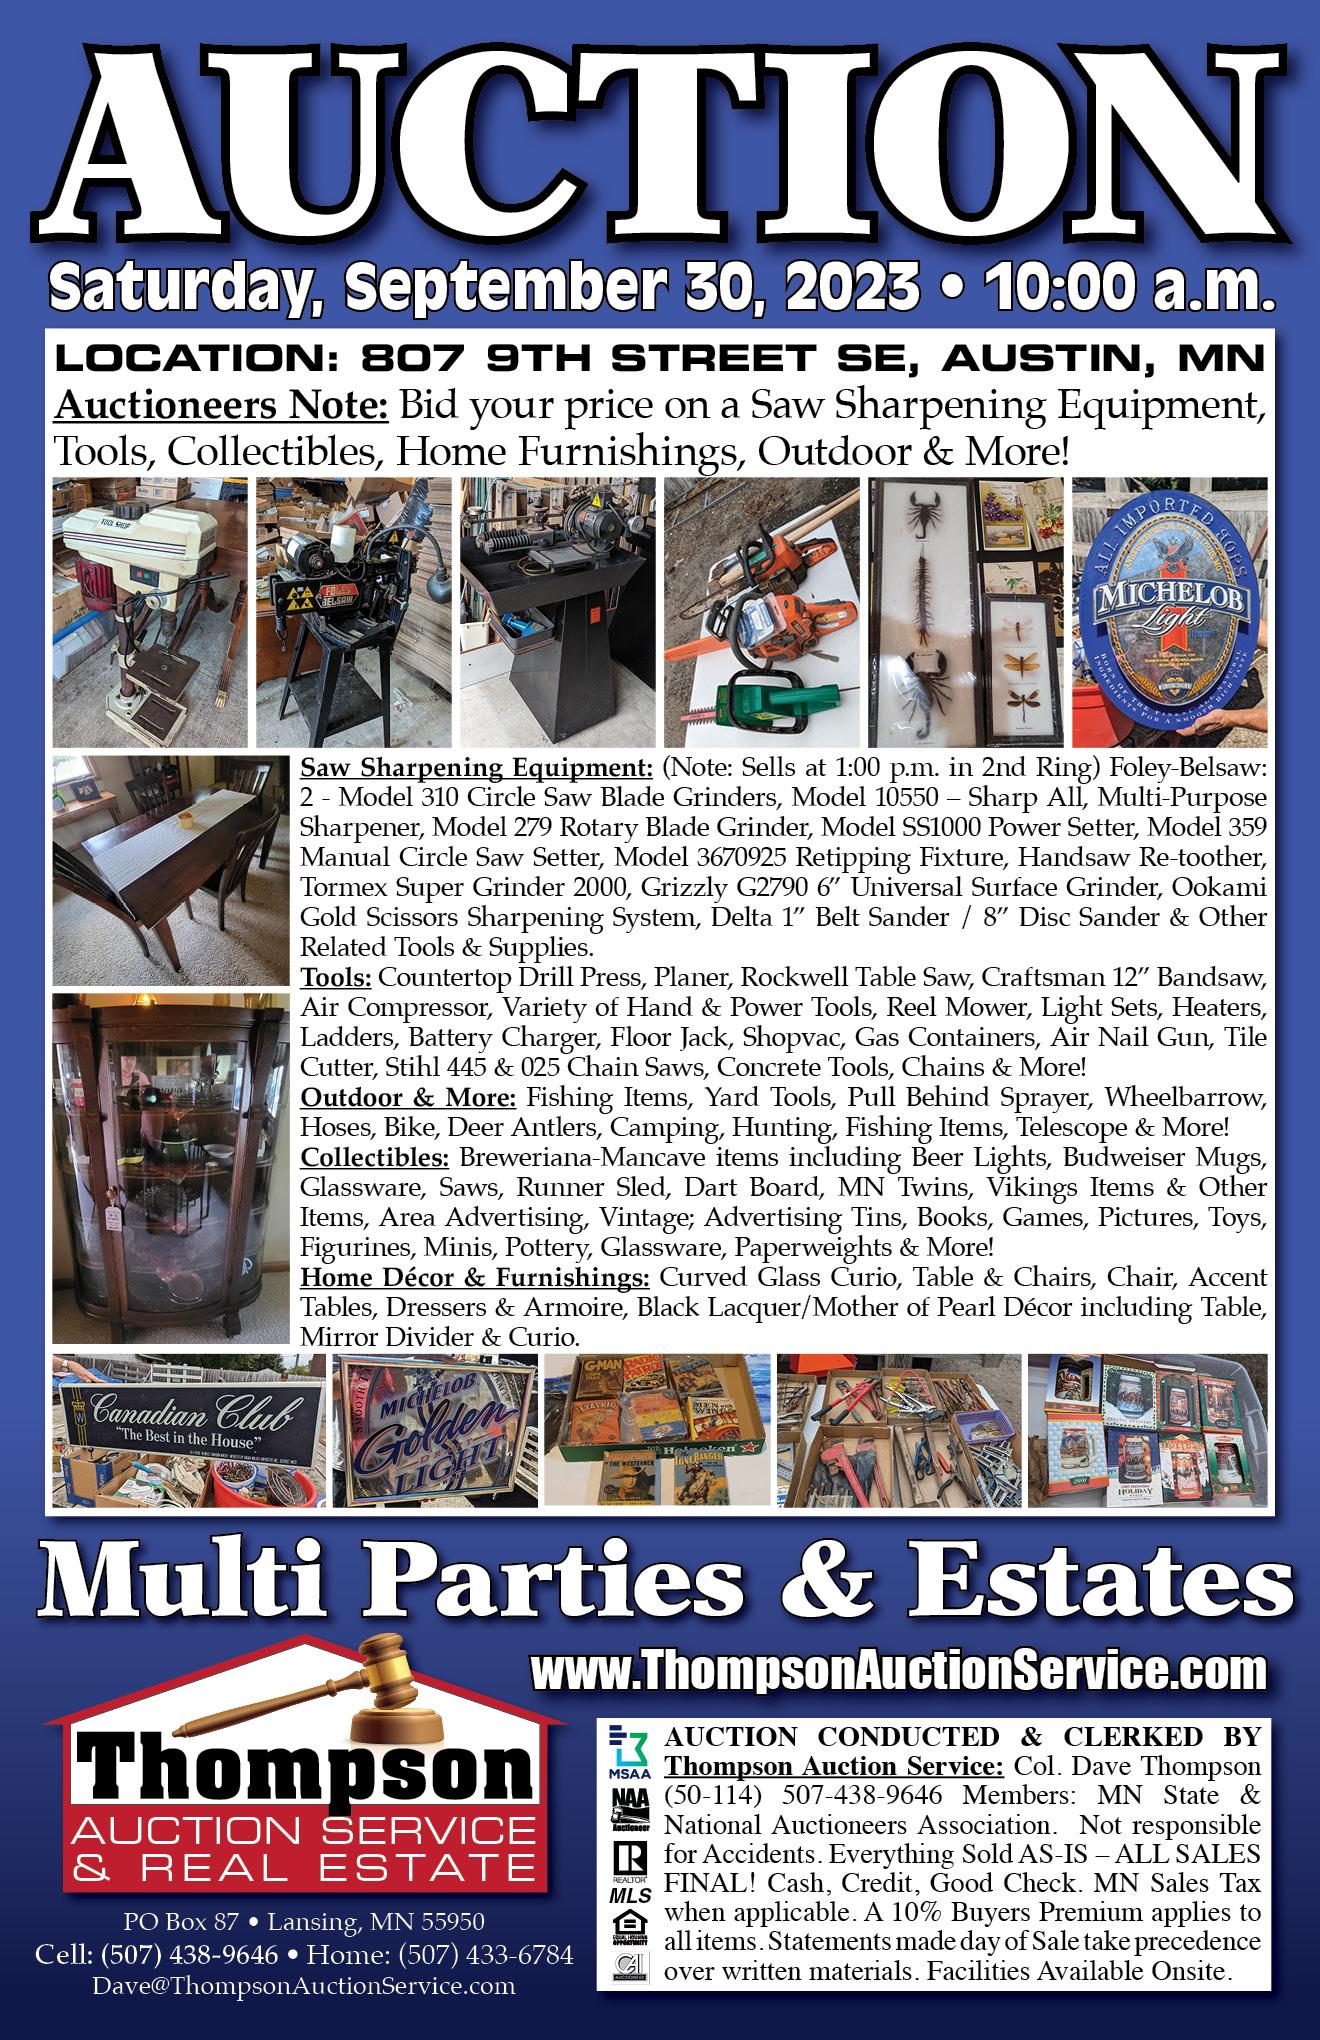 TOOLS, MAN CAVE, COLLECTIBLES & GREAT HOME FURNISHINGS LIVE AUCTION